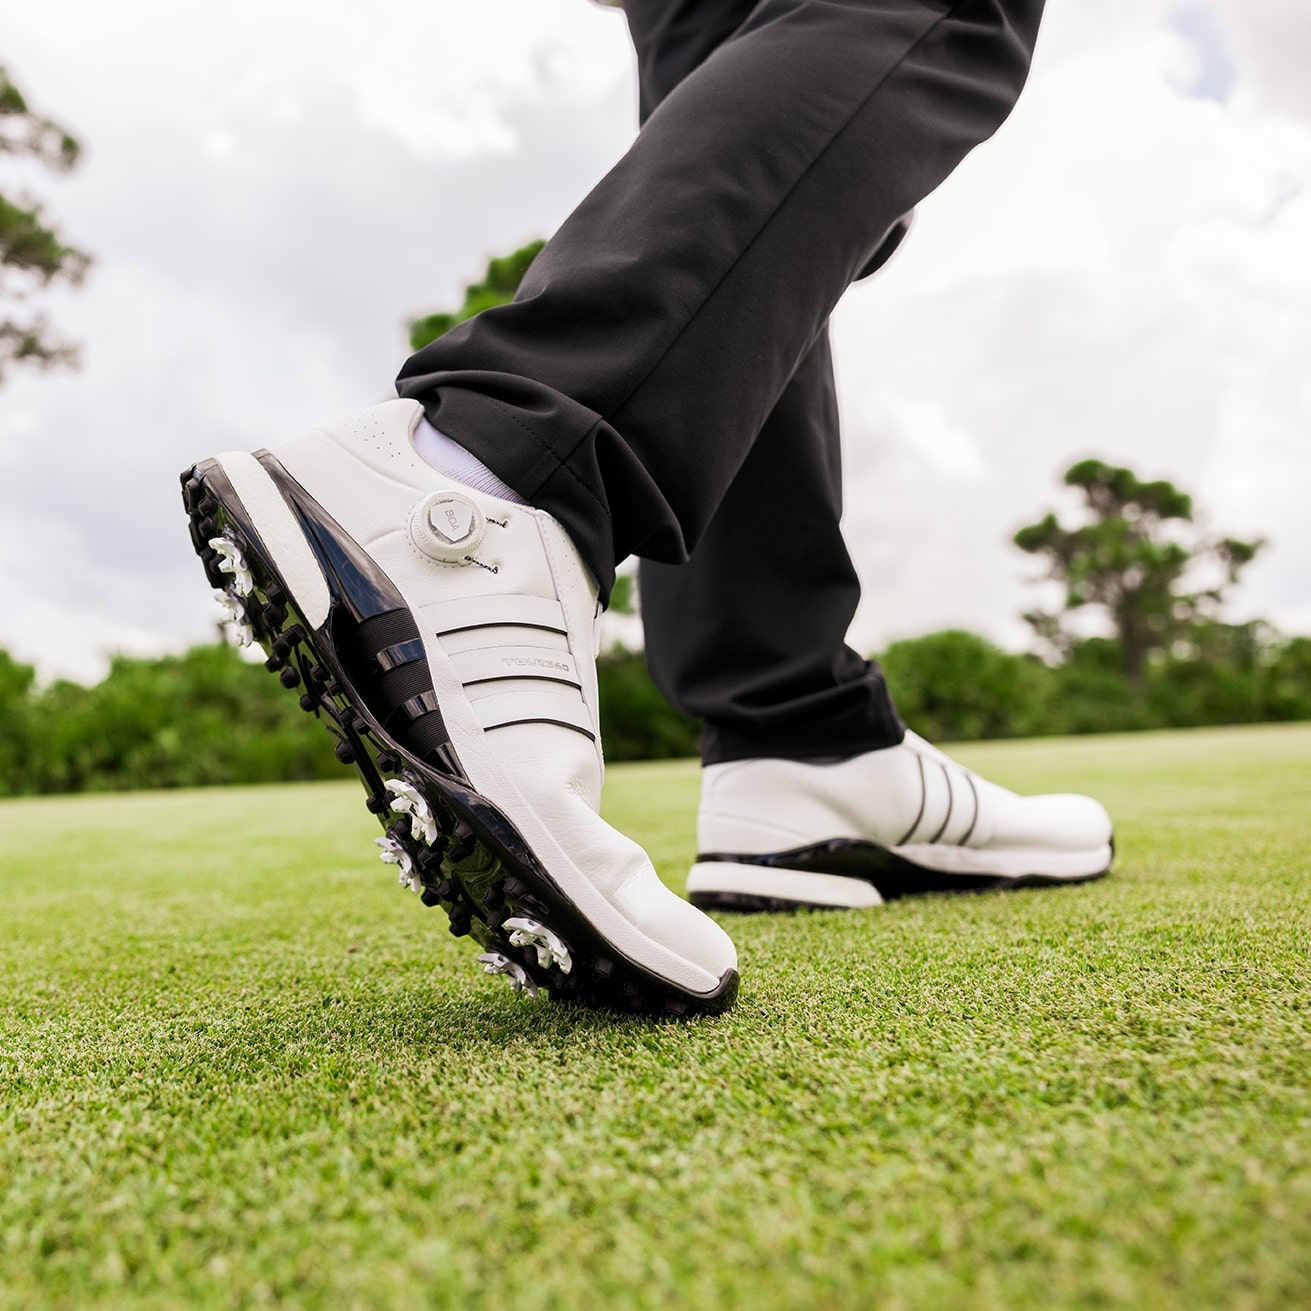 Mens Adidas Golf Shoes For Sale - UK Delivery - Golf Shoes